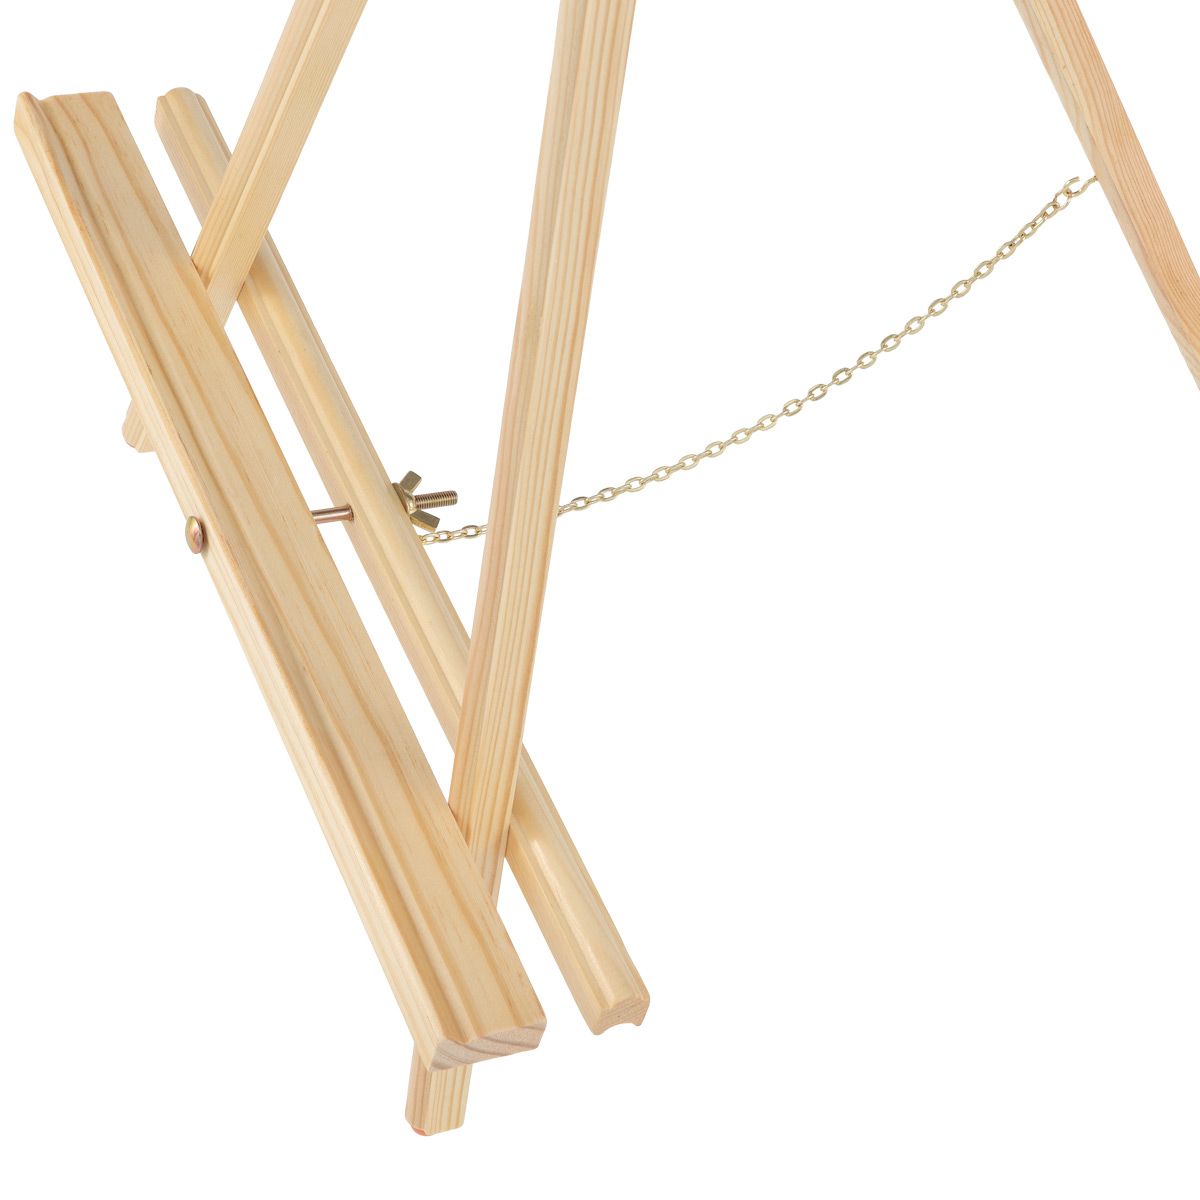 Adjustable legs with catch chain to stabilize easel